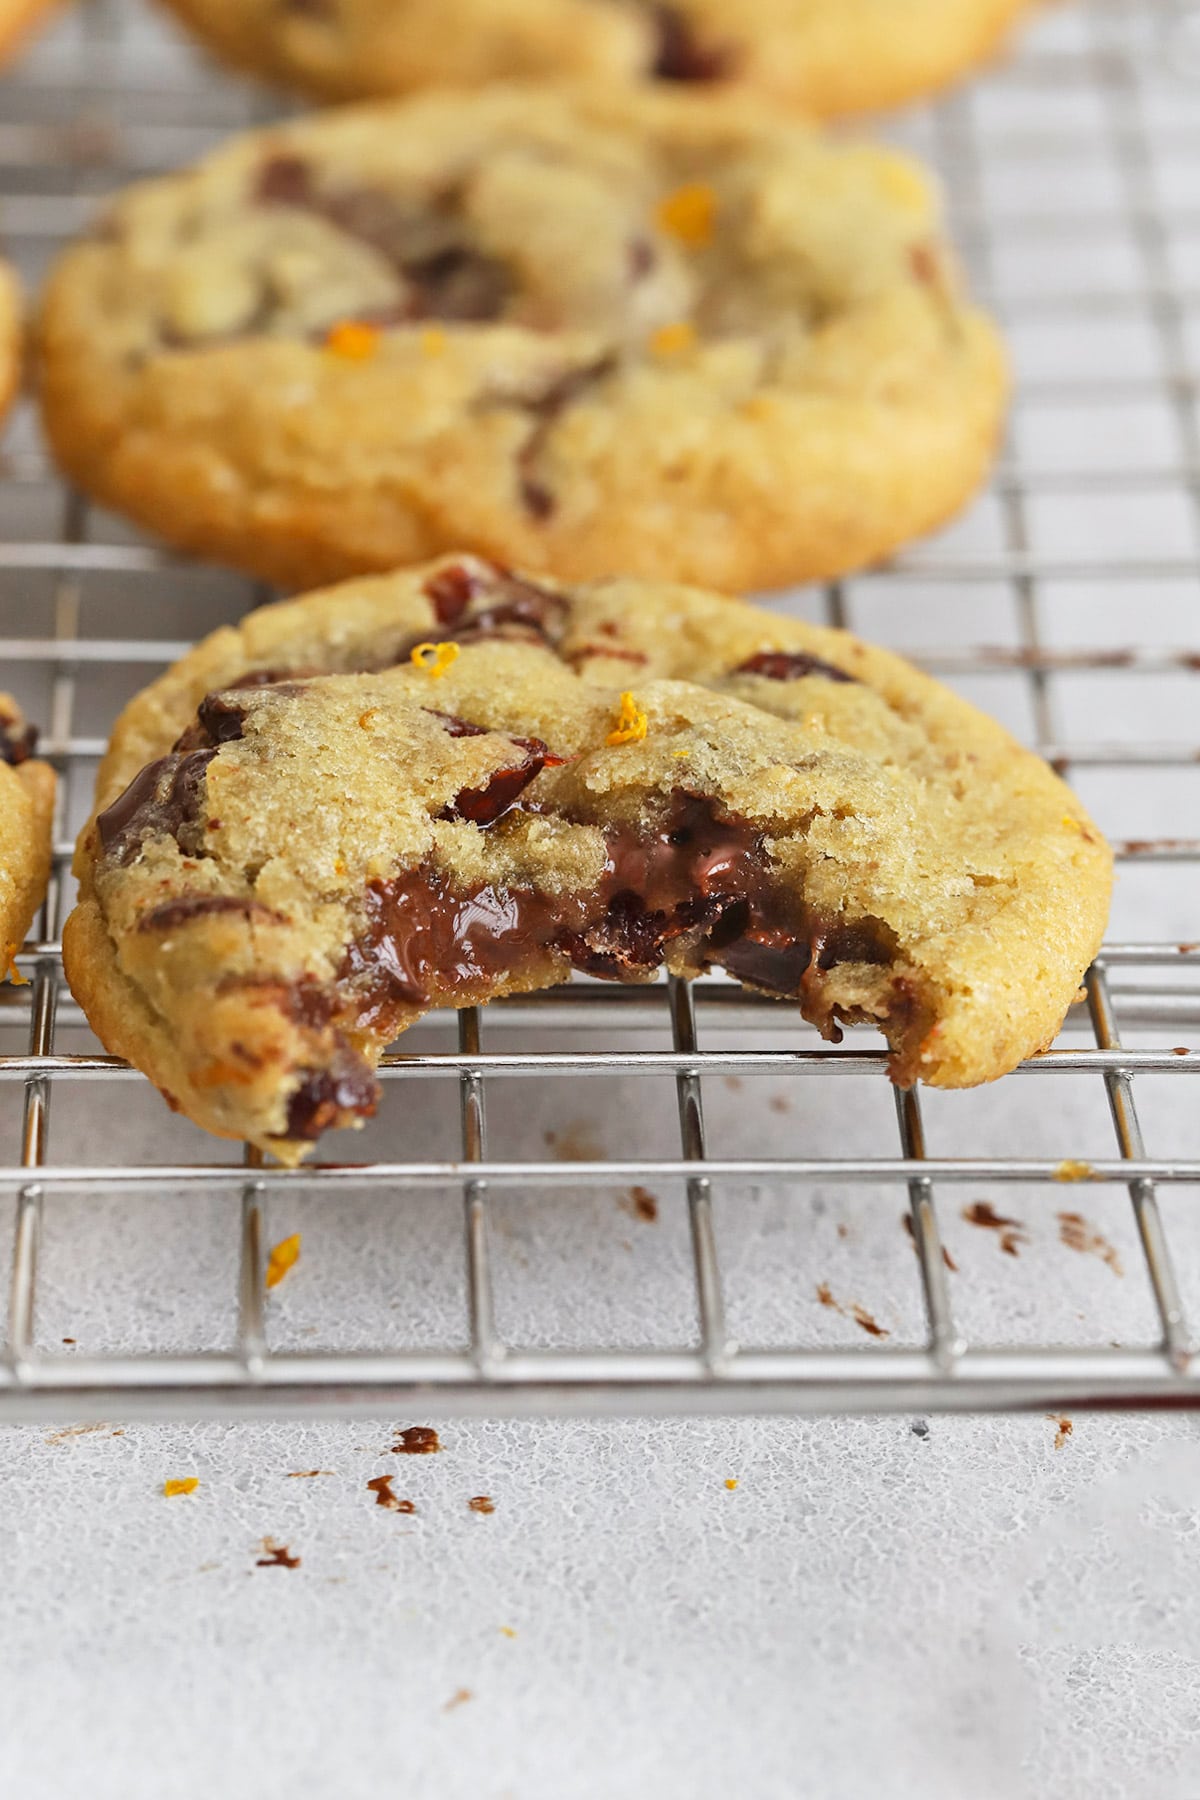 Front view of a gluten-free orange cranberry chocolate chip cookie with a bite taken out of it, revealing a gooey chocolate center